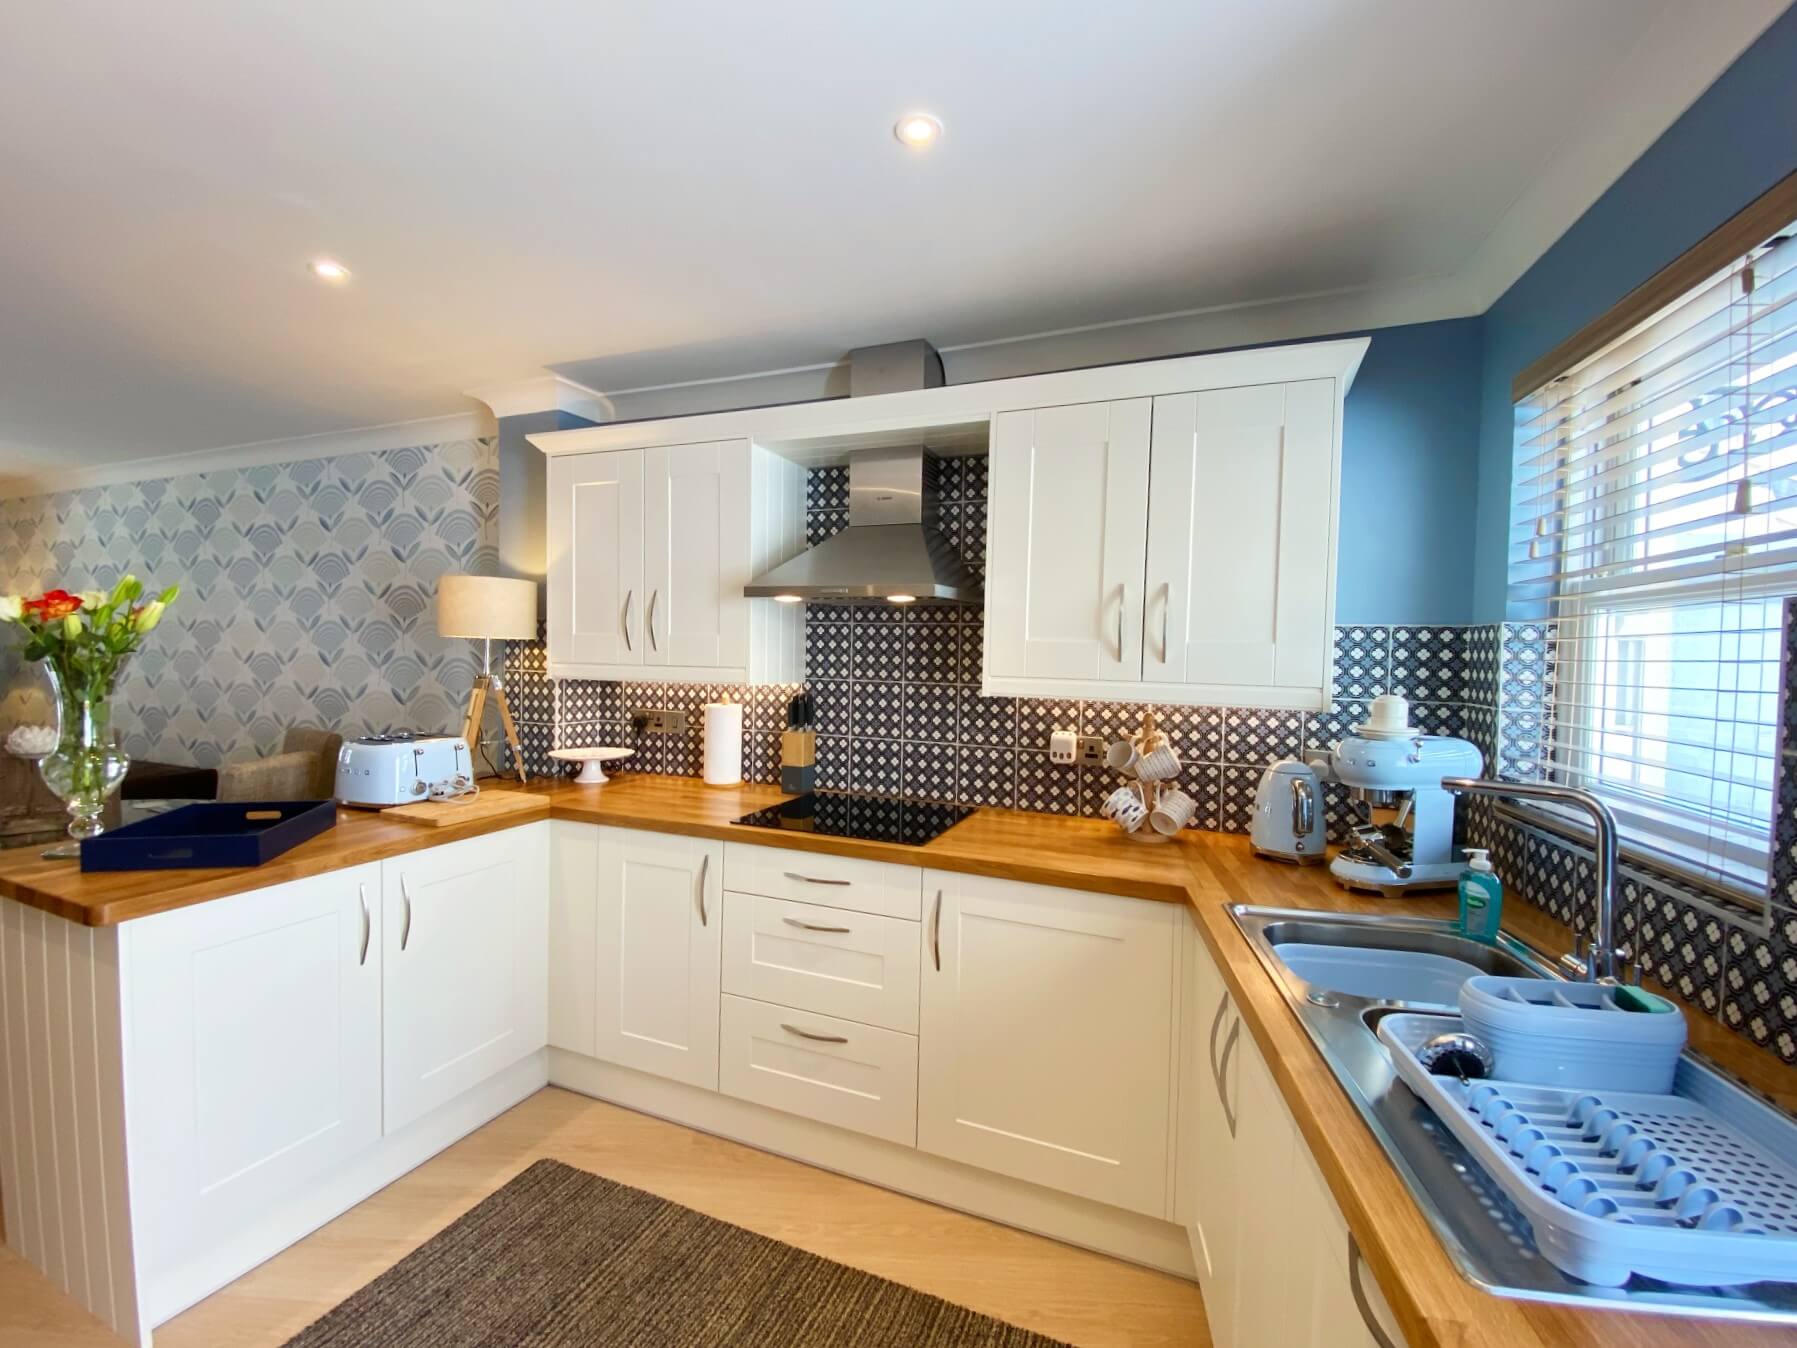 Lisburne Place Luxury Town House Self Catering - Kitchen 